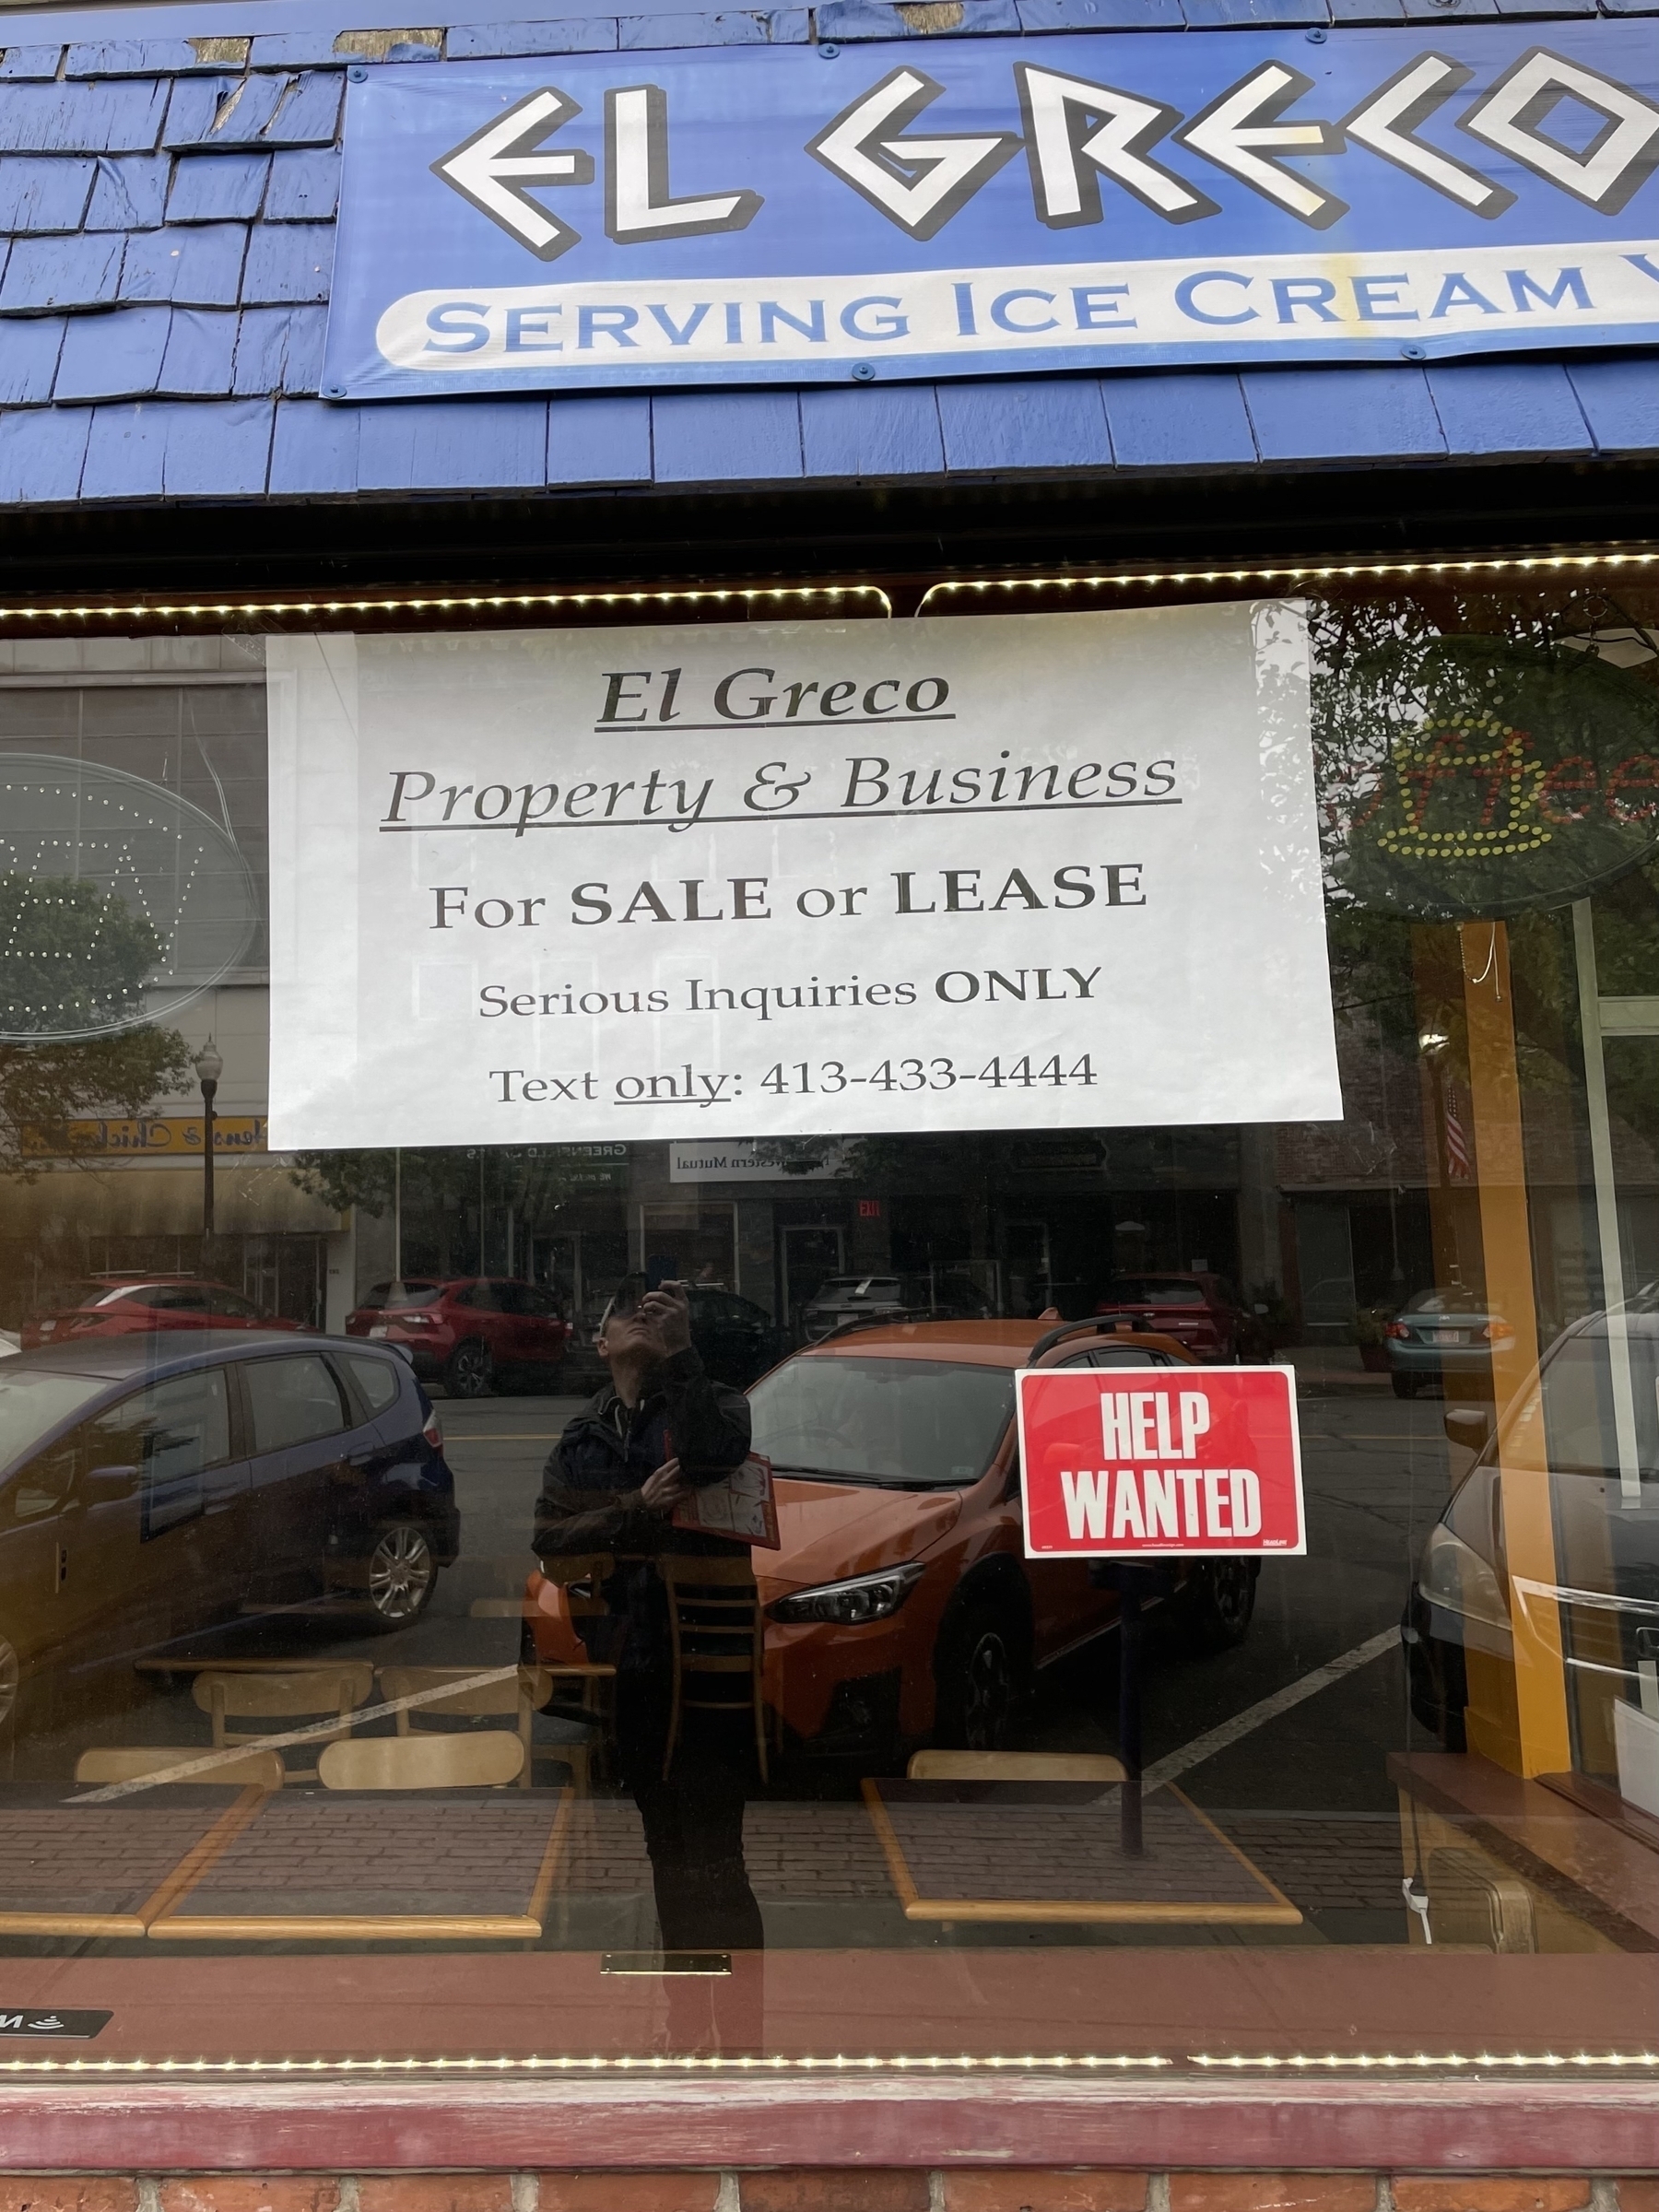 For sale sign in the window of El Greco restaurant in Greenfield MA